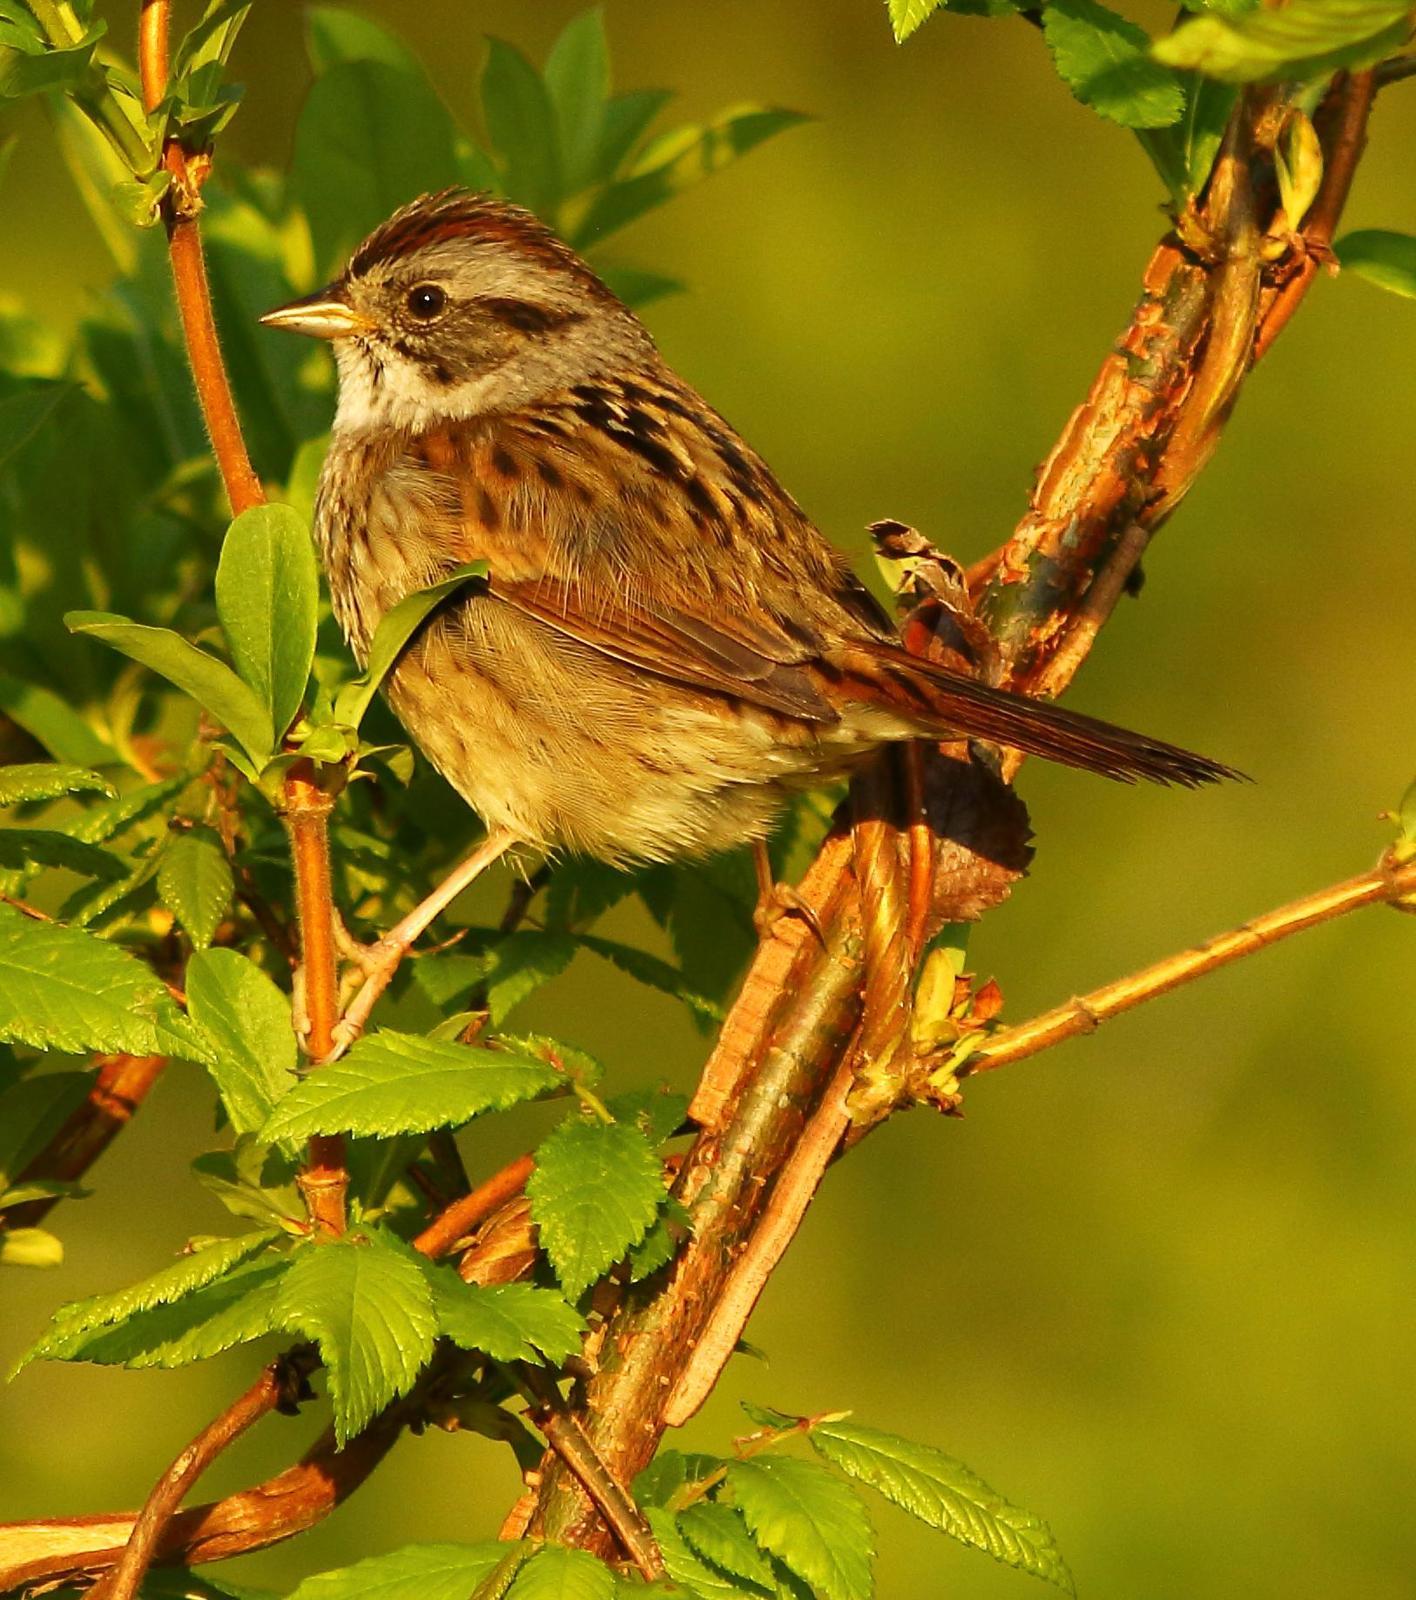 Swamp Sparrow Photo by Terry Campbell